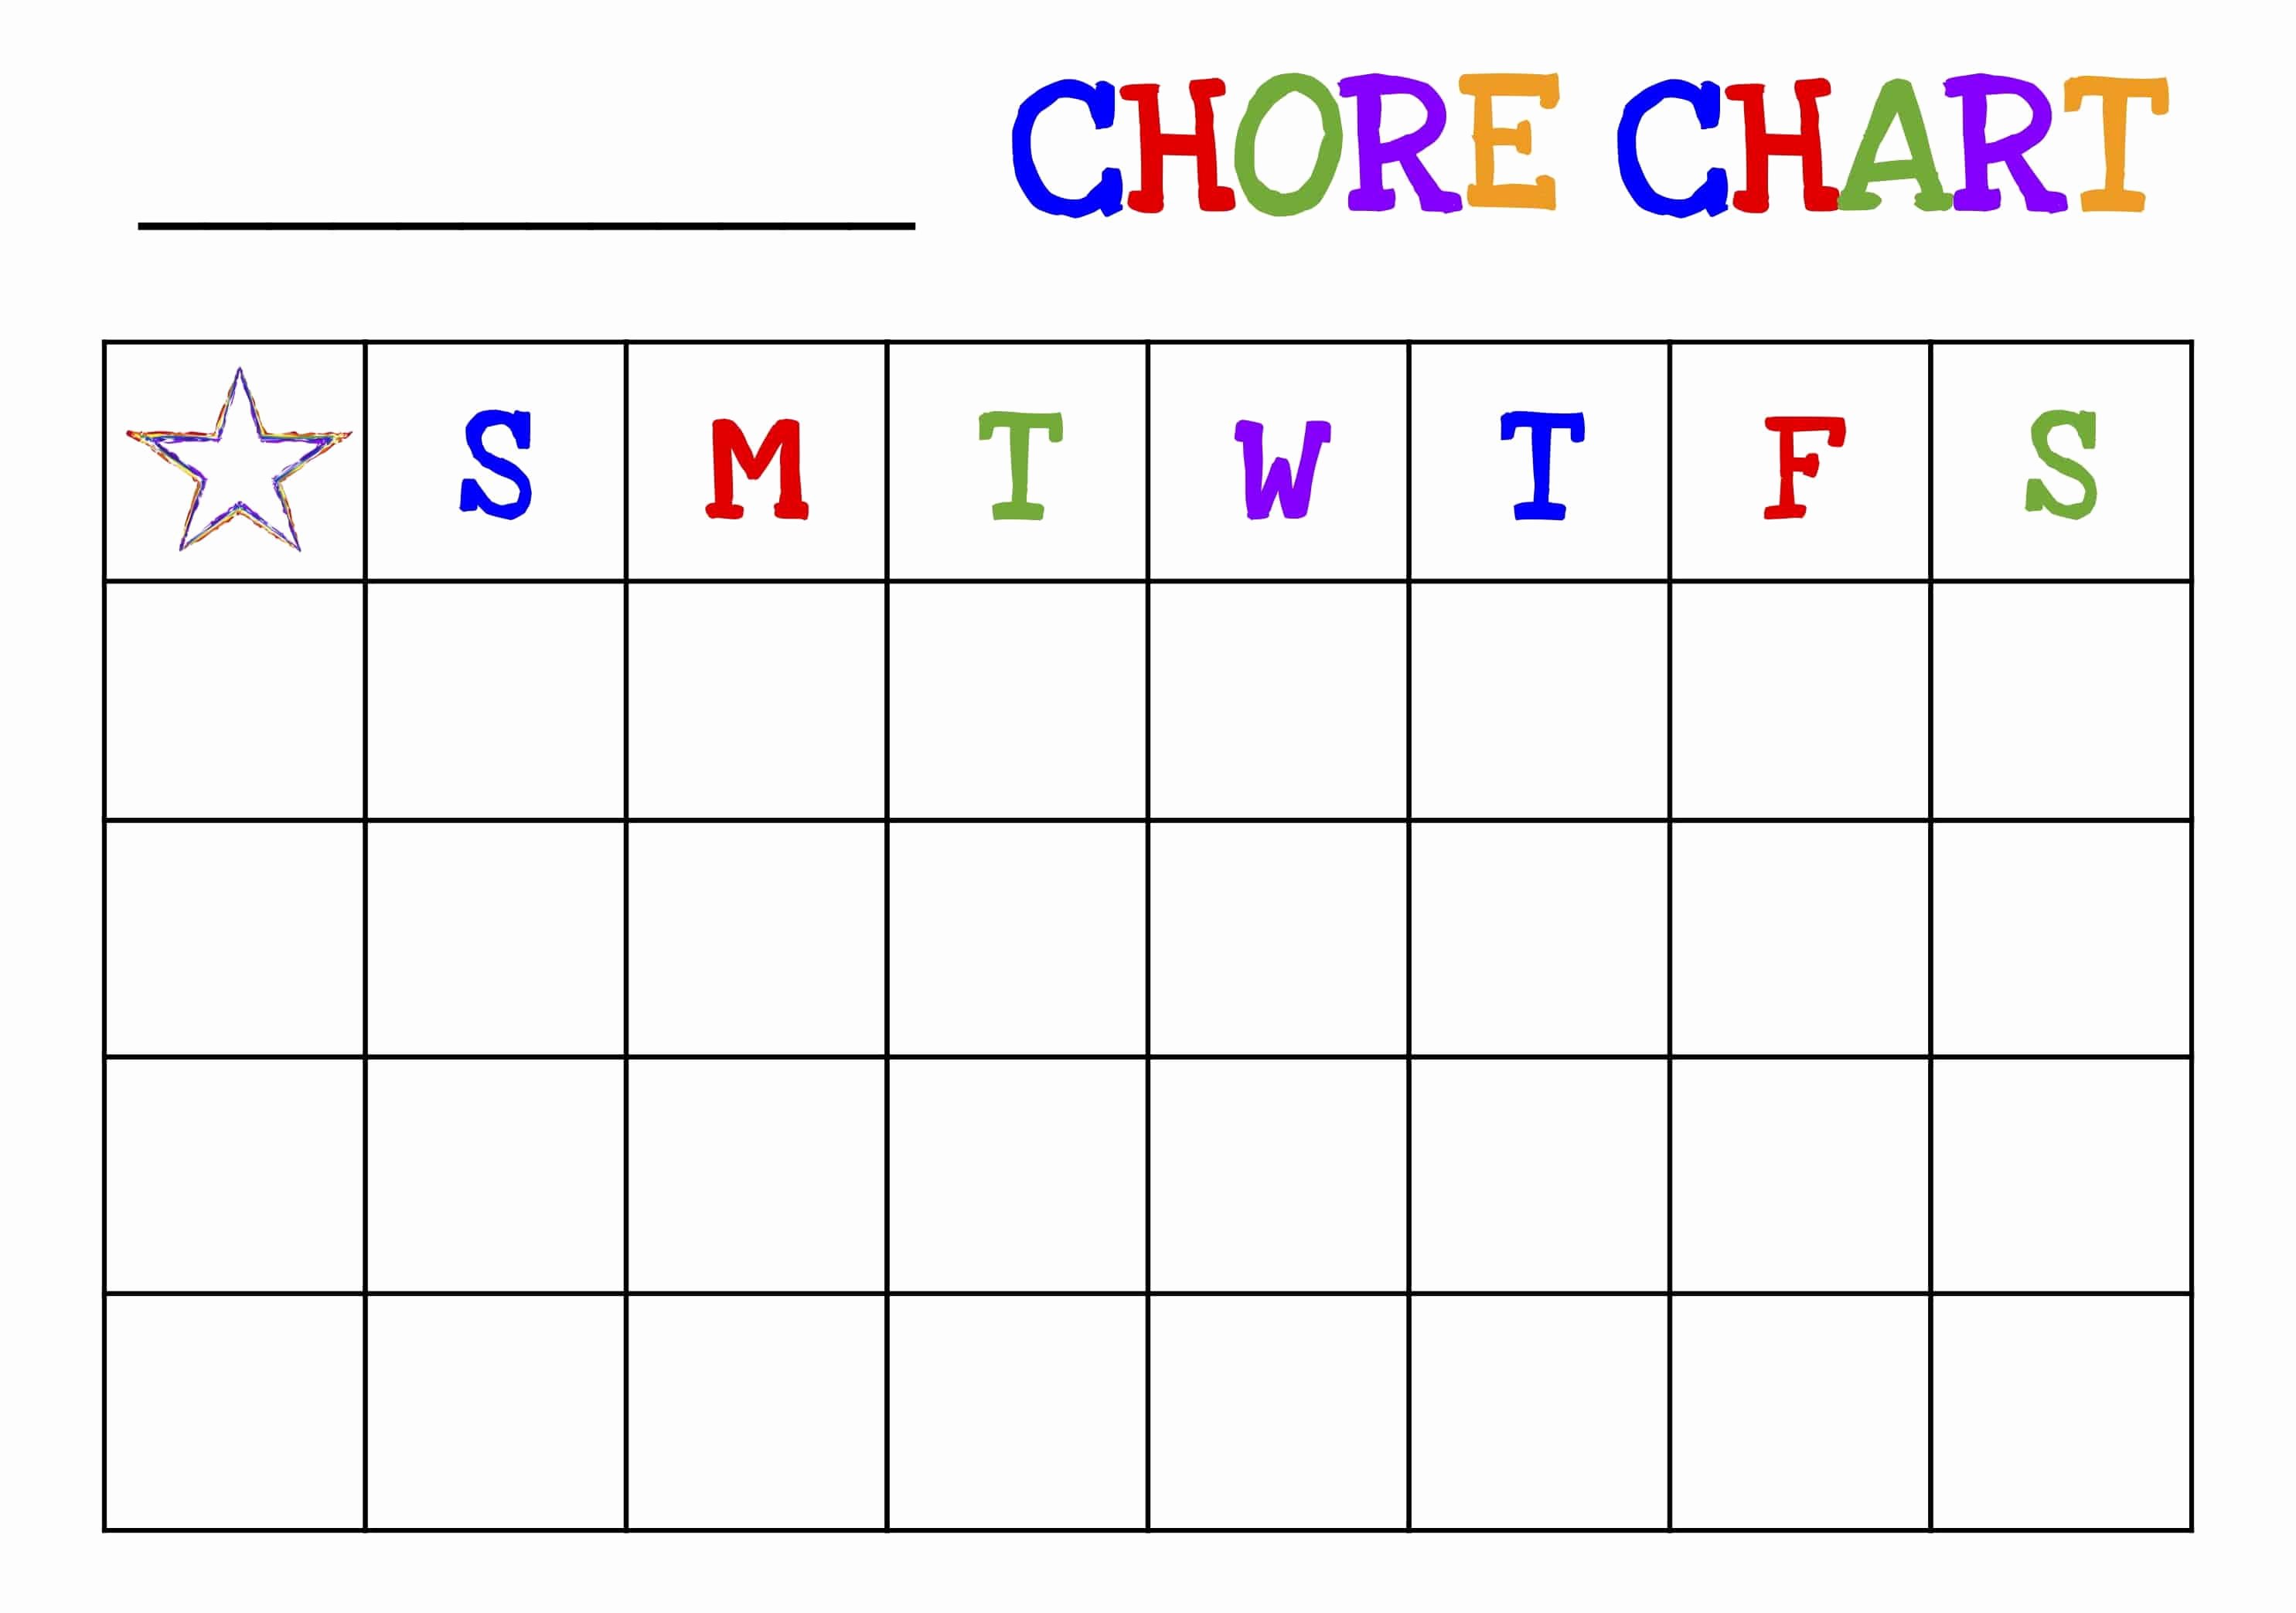 Free Chore Chart Printable Best Of Free Printable Chore Chart for Kids